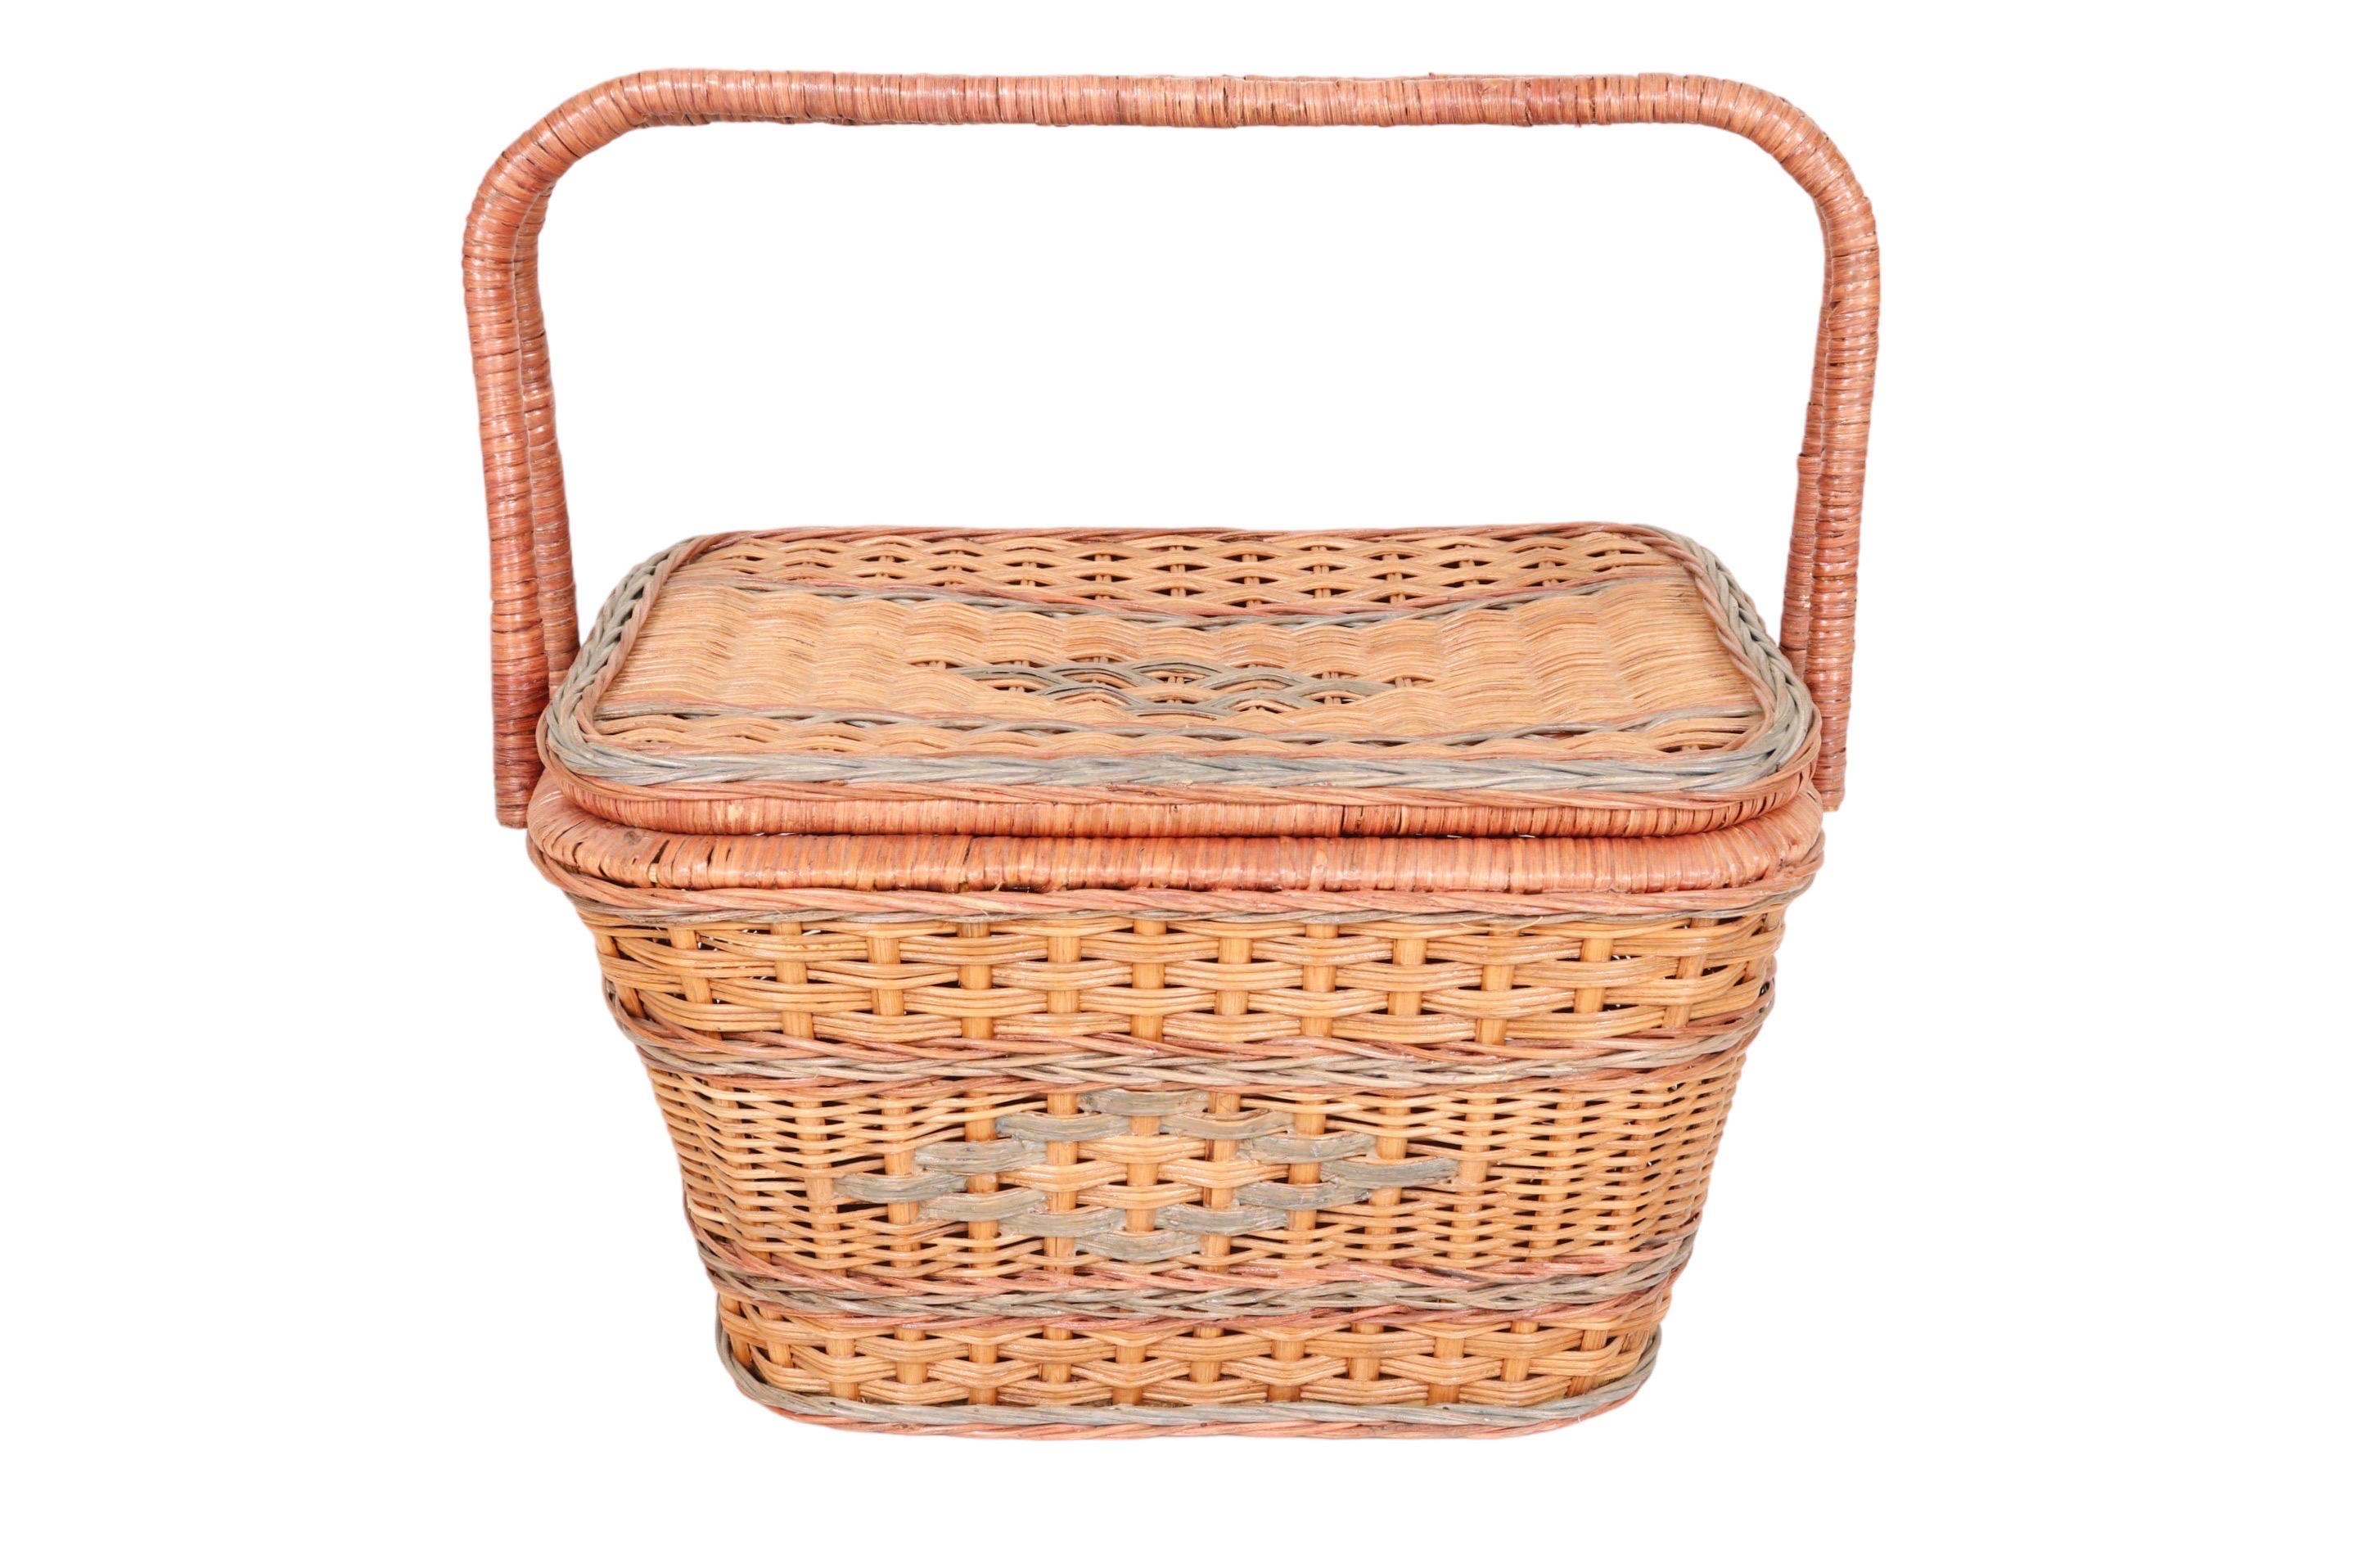 A wicker picnic hamper basket with two wrapped bamboo handles. Decorated on each side with twisted bands of rattan in pink and green, and green woven diamonds reminiscent of Heywood Wakefield. The lid is hinged at one side and opens to reveal plenty